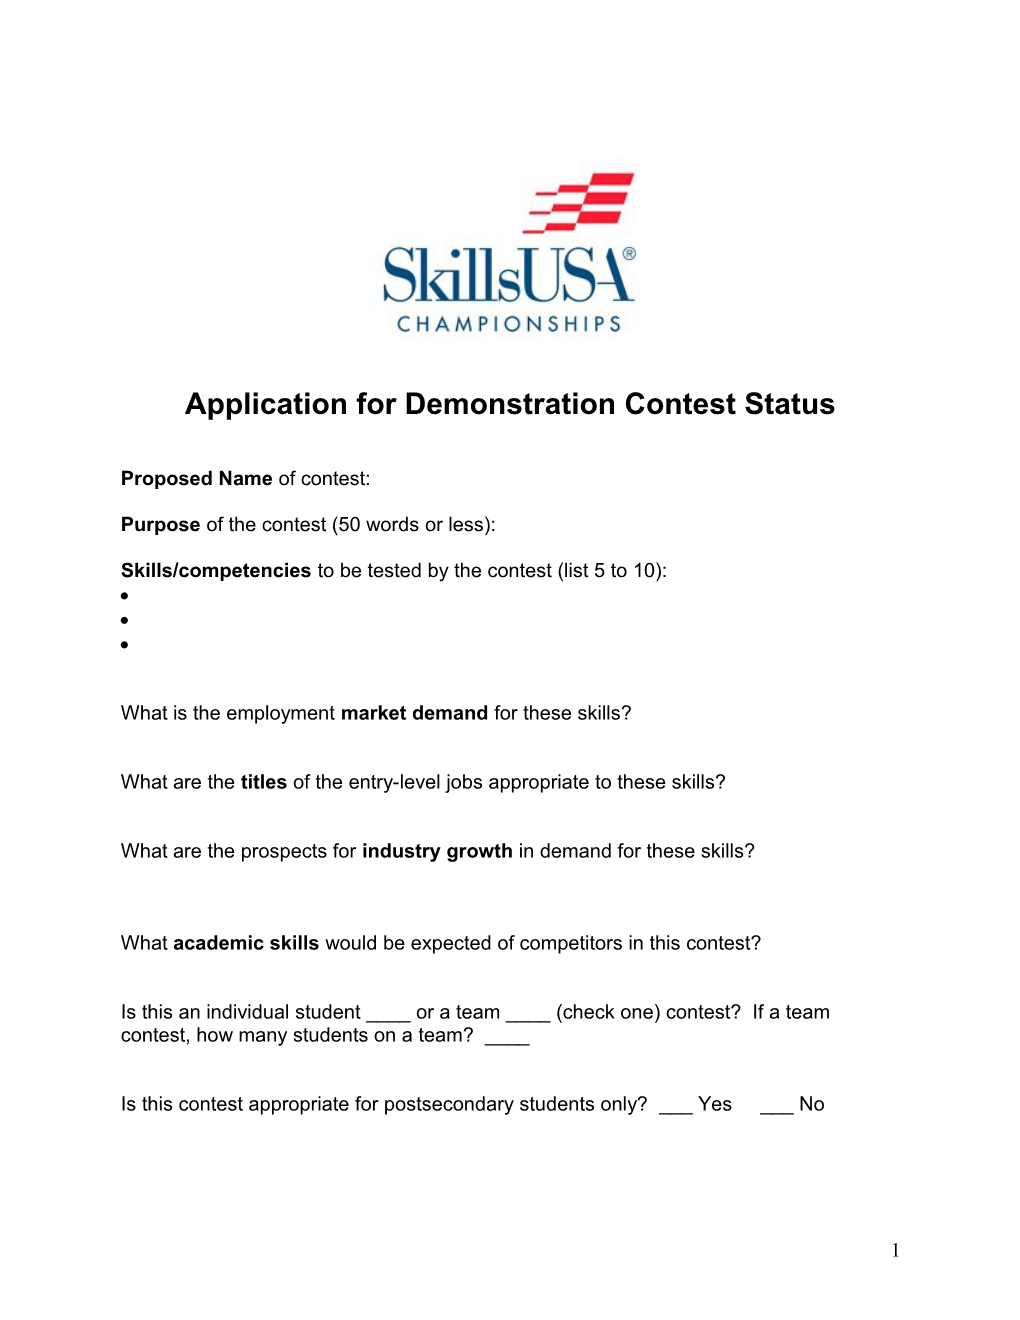 Application for Demonstration Contest Status